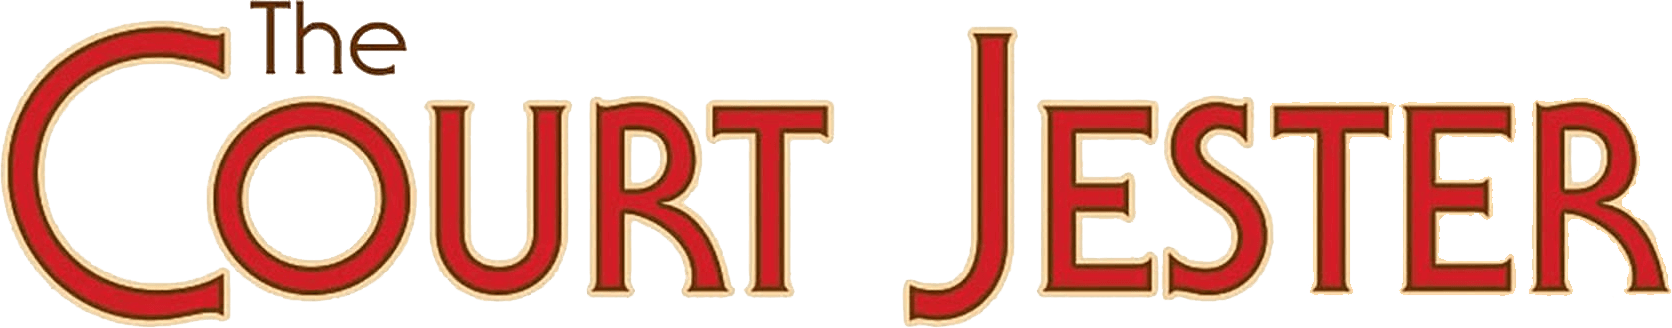 The Court Jester logo